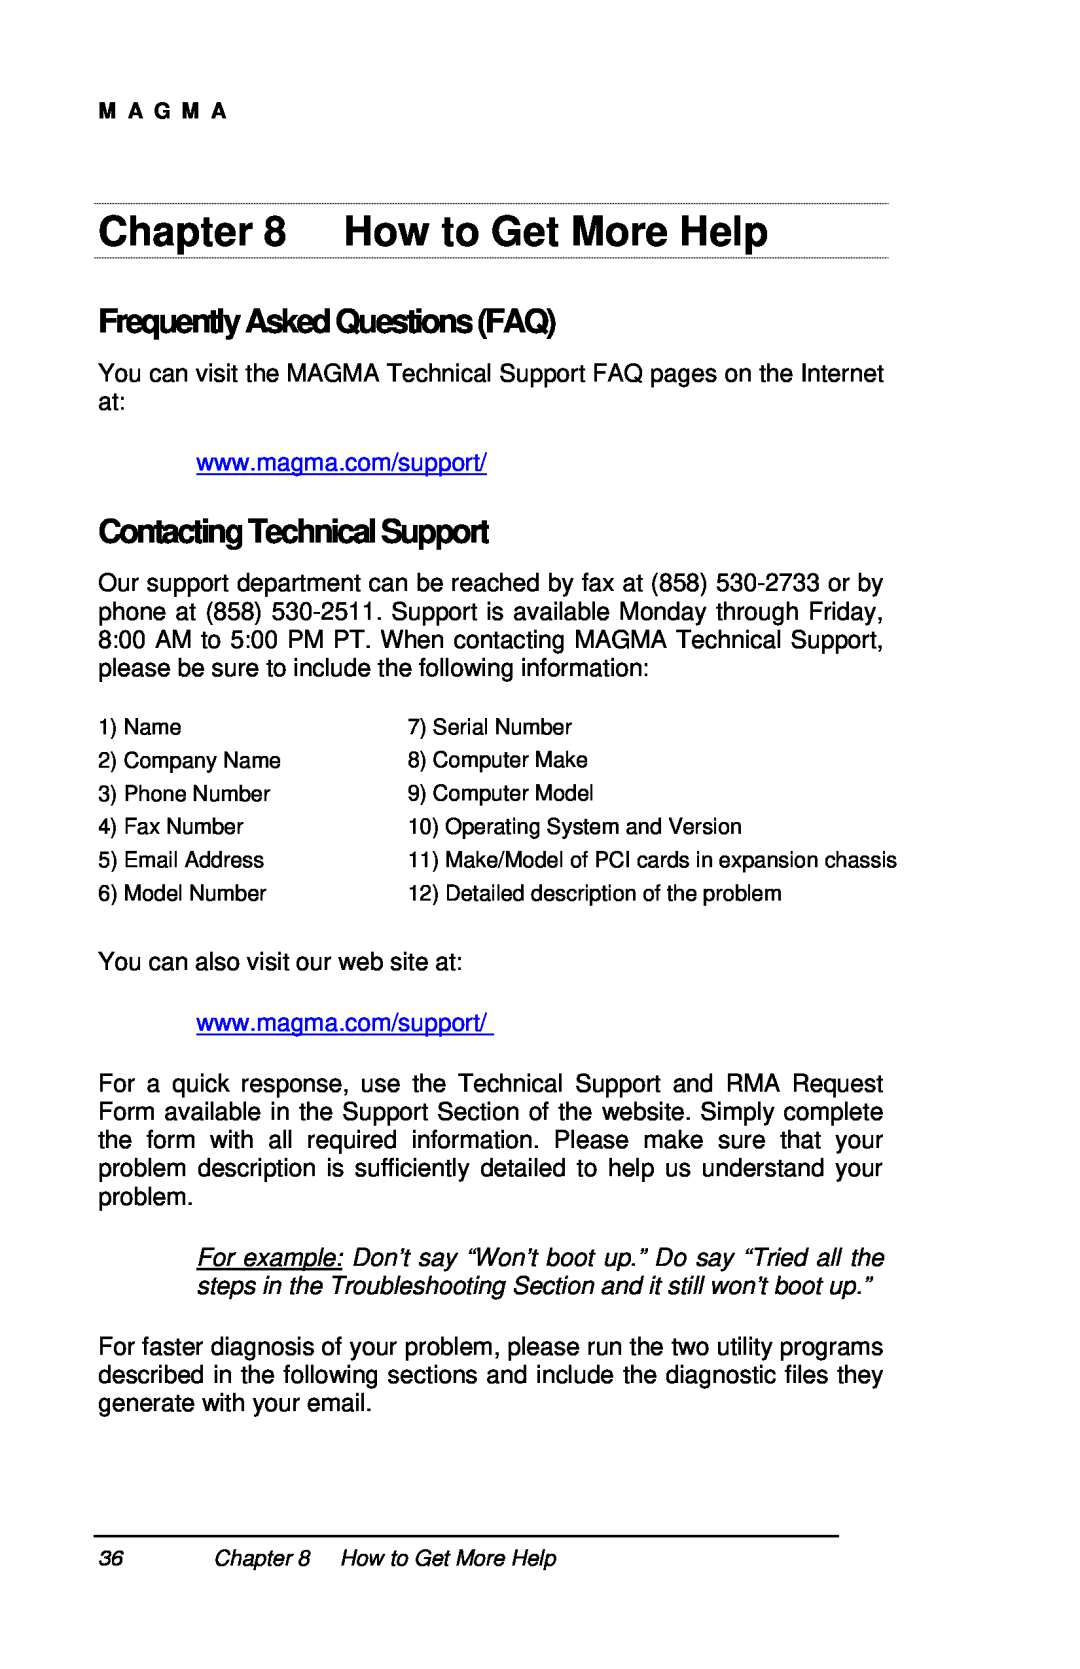 Magma P13RR-TEL user manual How to Get More Help, FrequentlyAskedQuestionsFAQ, Contacting Technical Support 